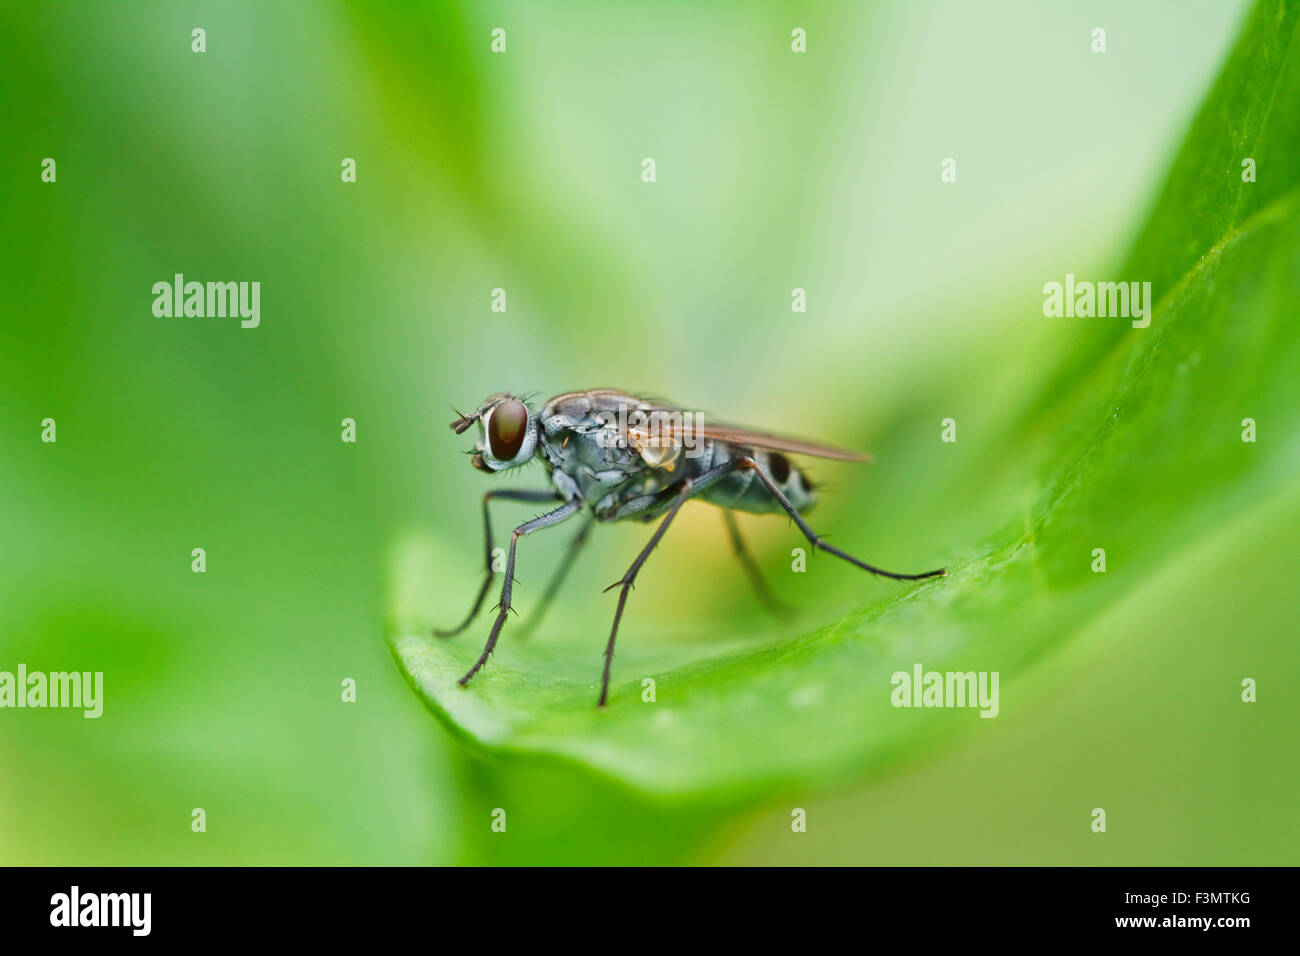 insect on grass Stock Photo